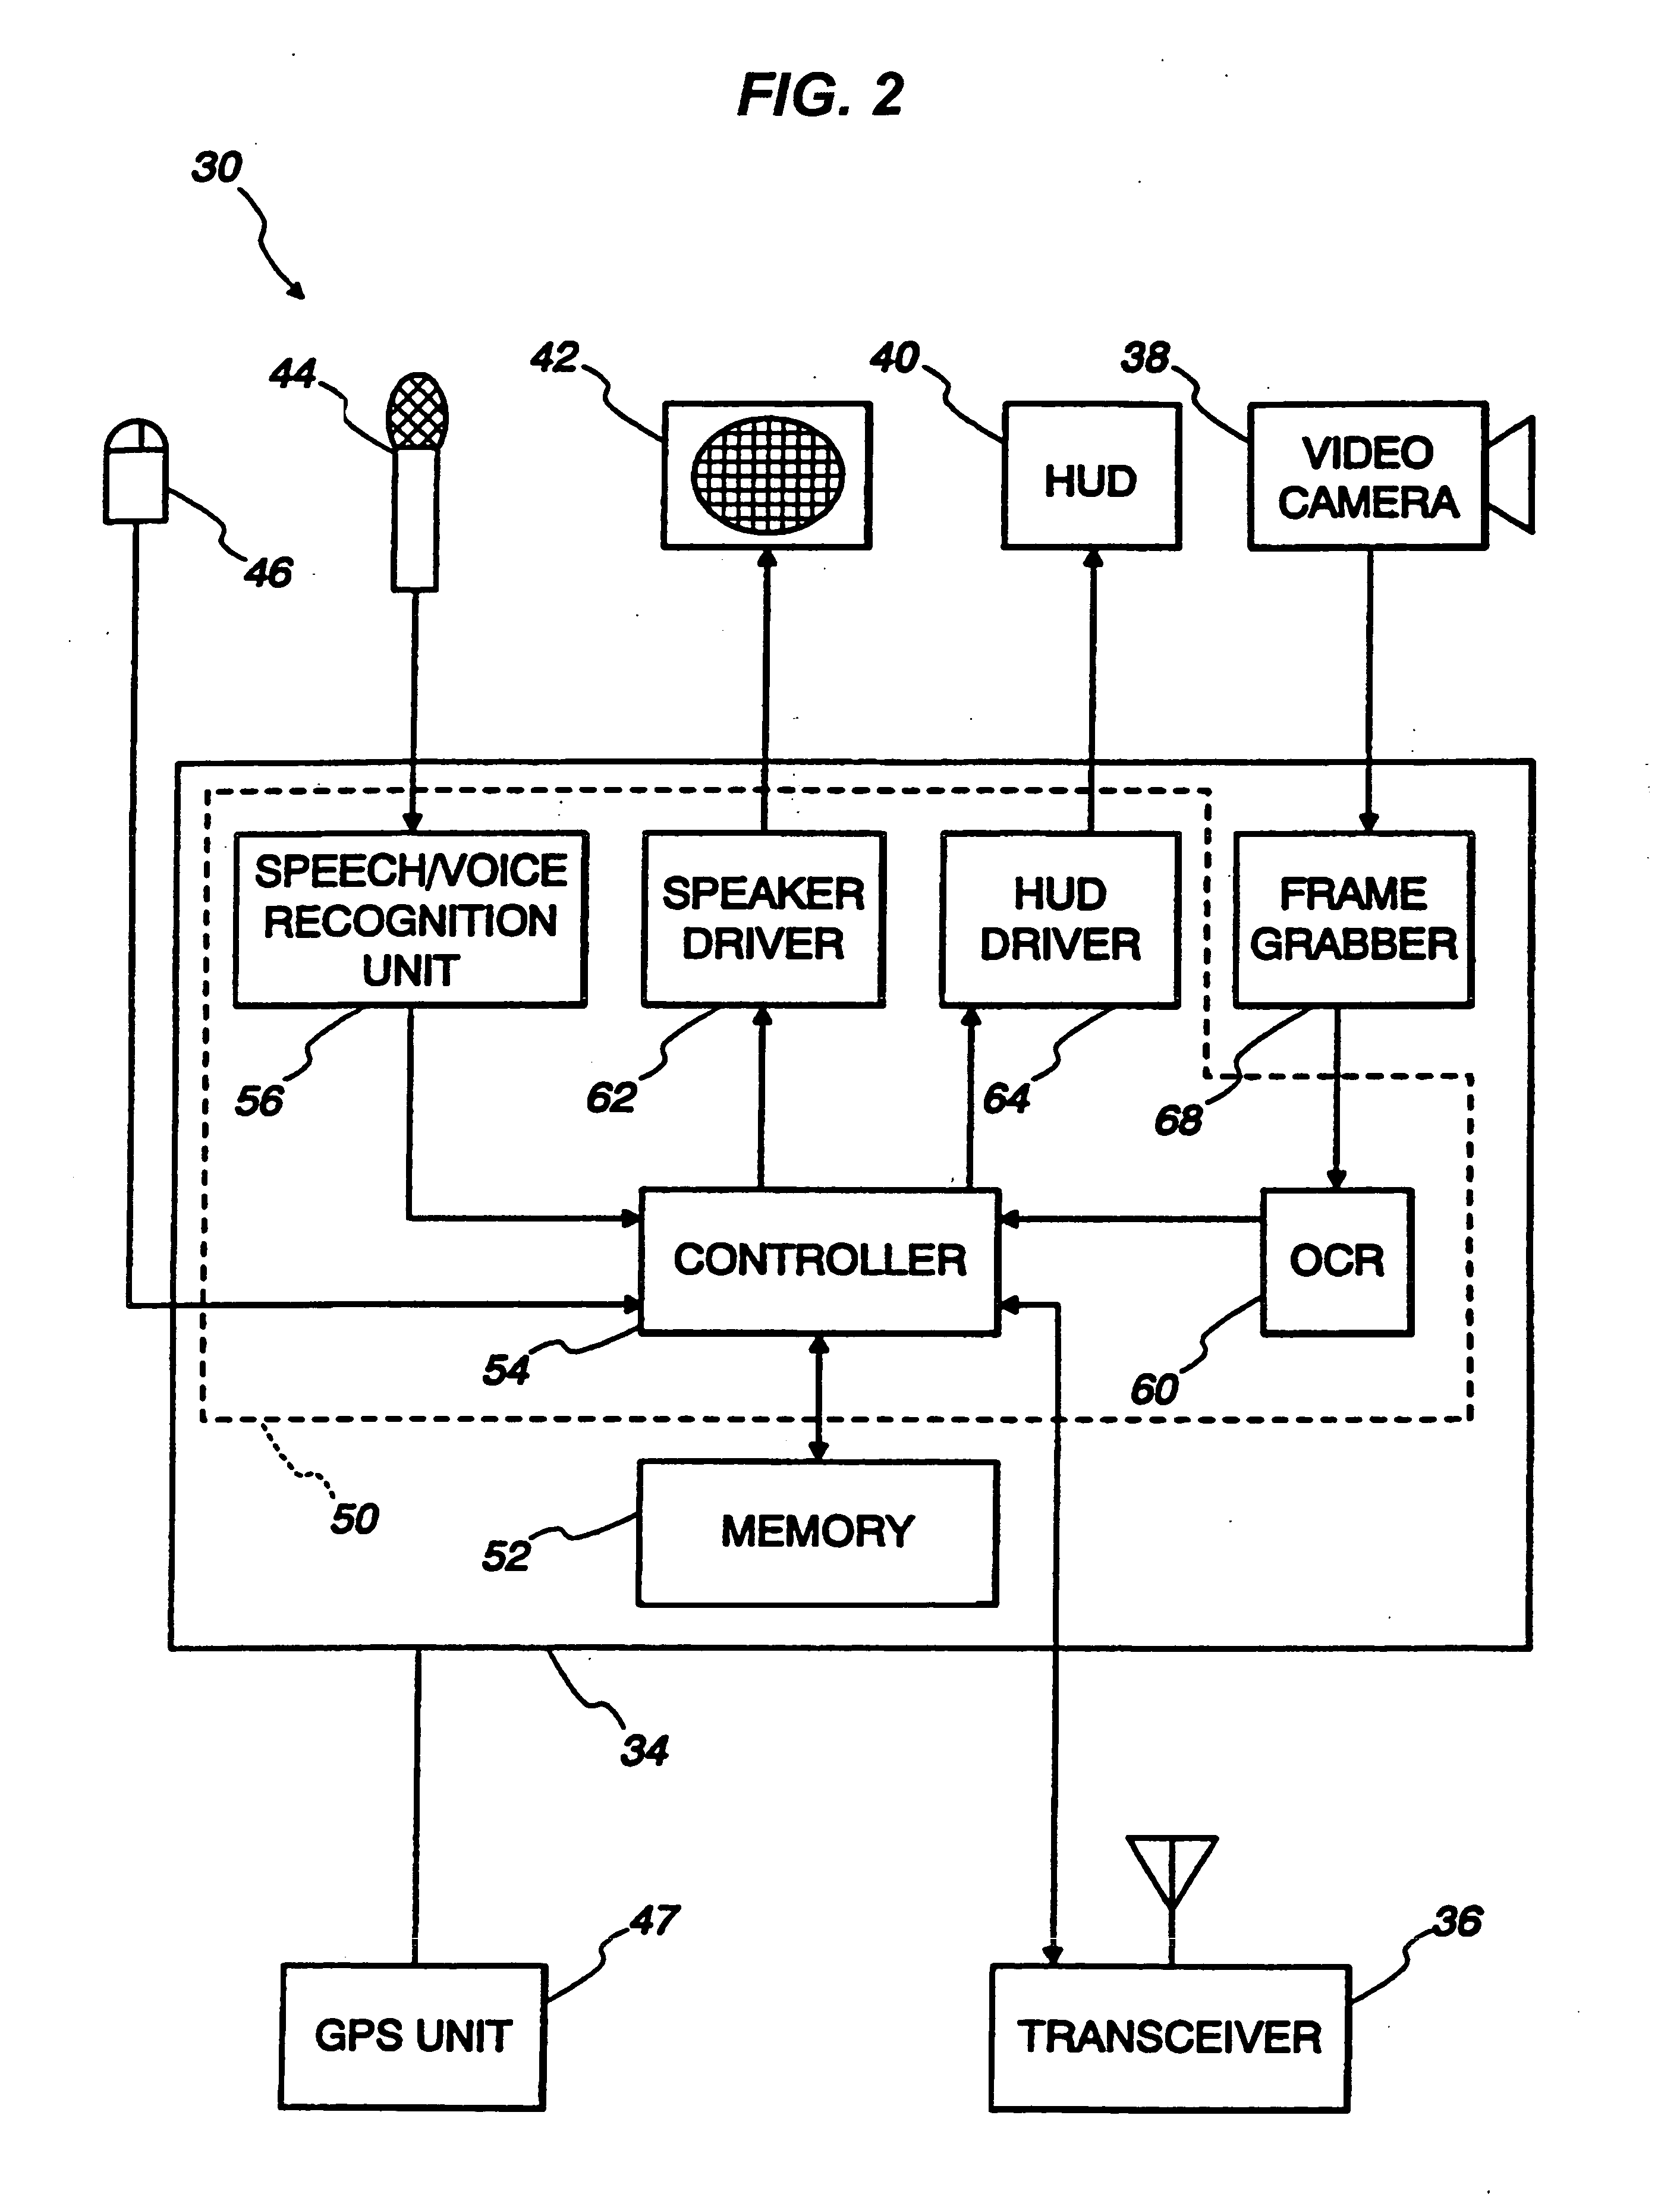 Wireless handheld communicator in a process control environment